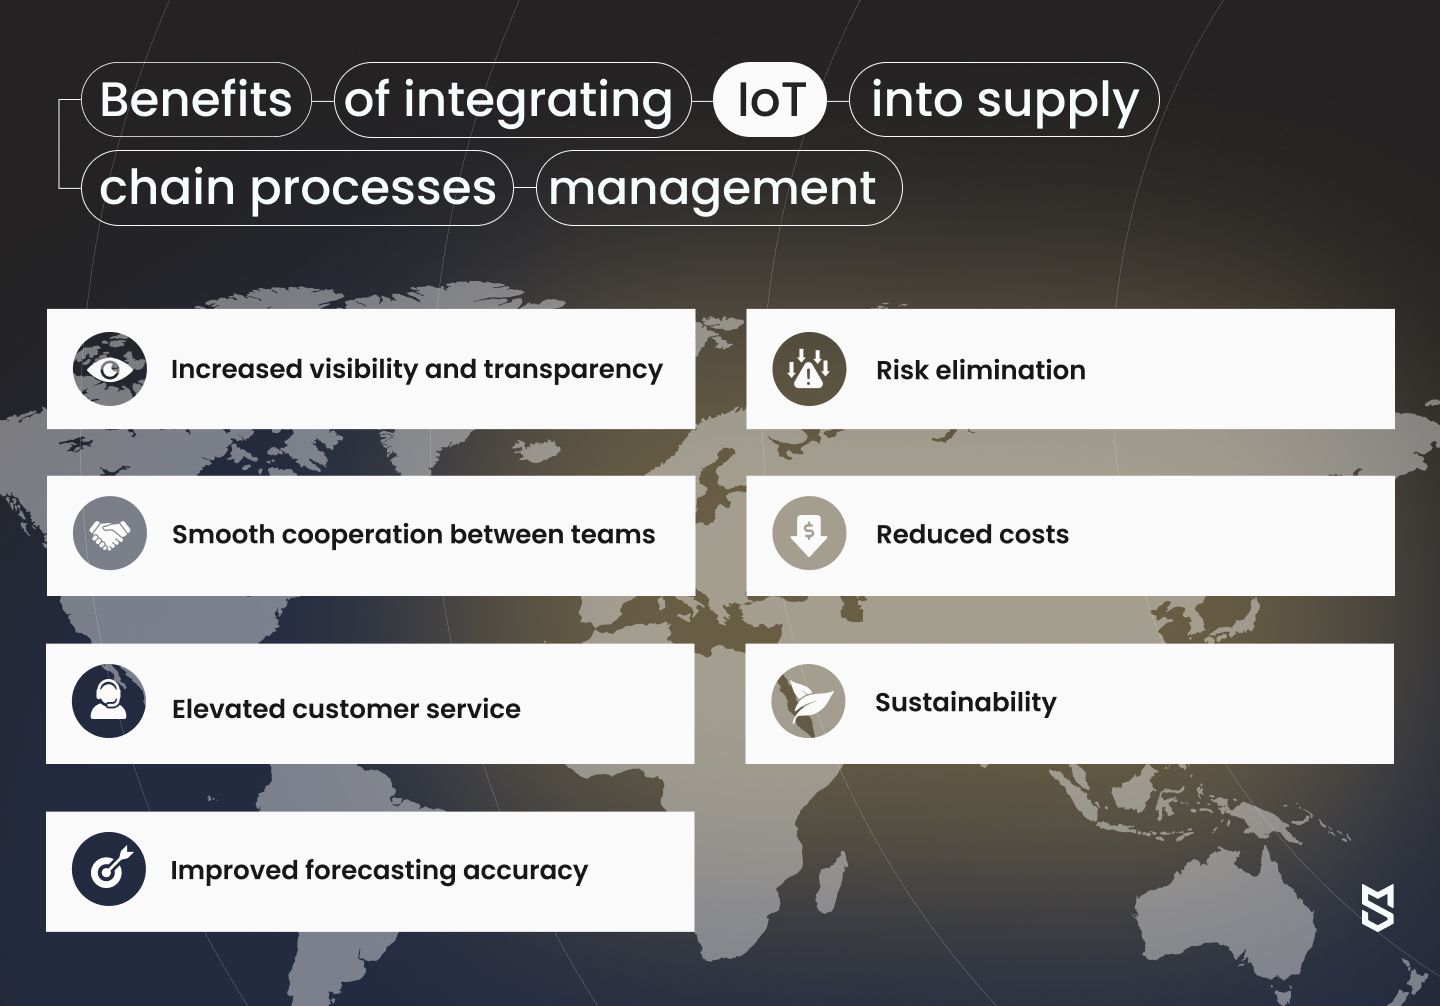 Benefits of integrating IoT into supply chain processes